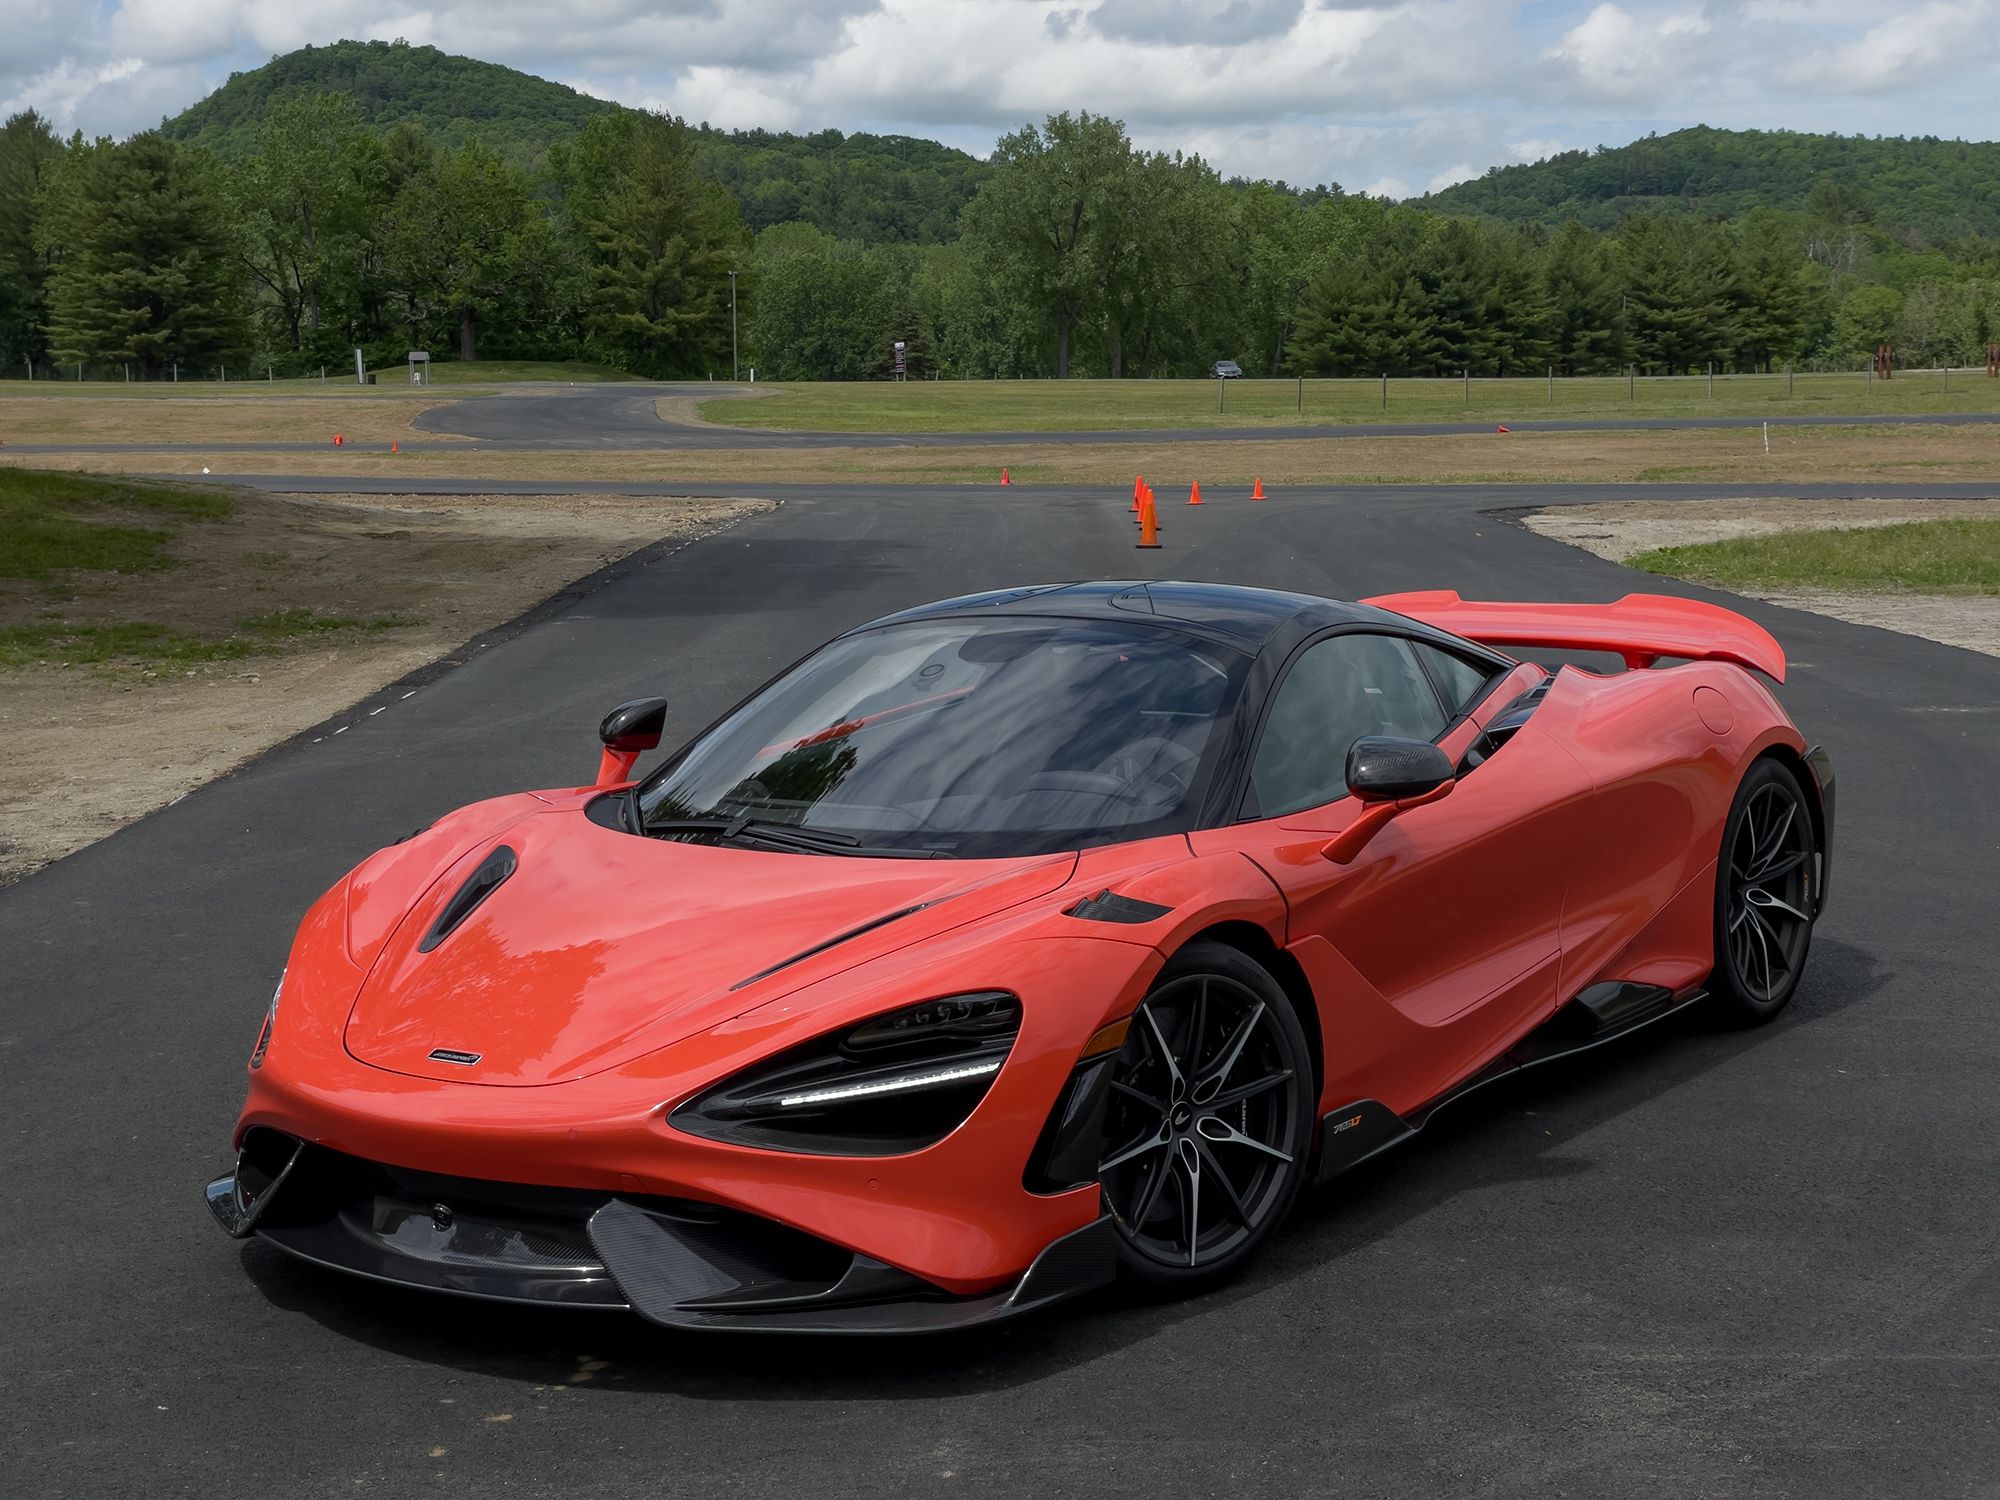 The 2021 McLaren 765LT Review: A Fighter Jet on Wheels